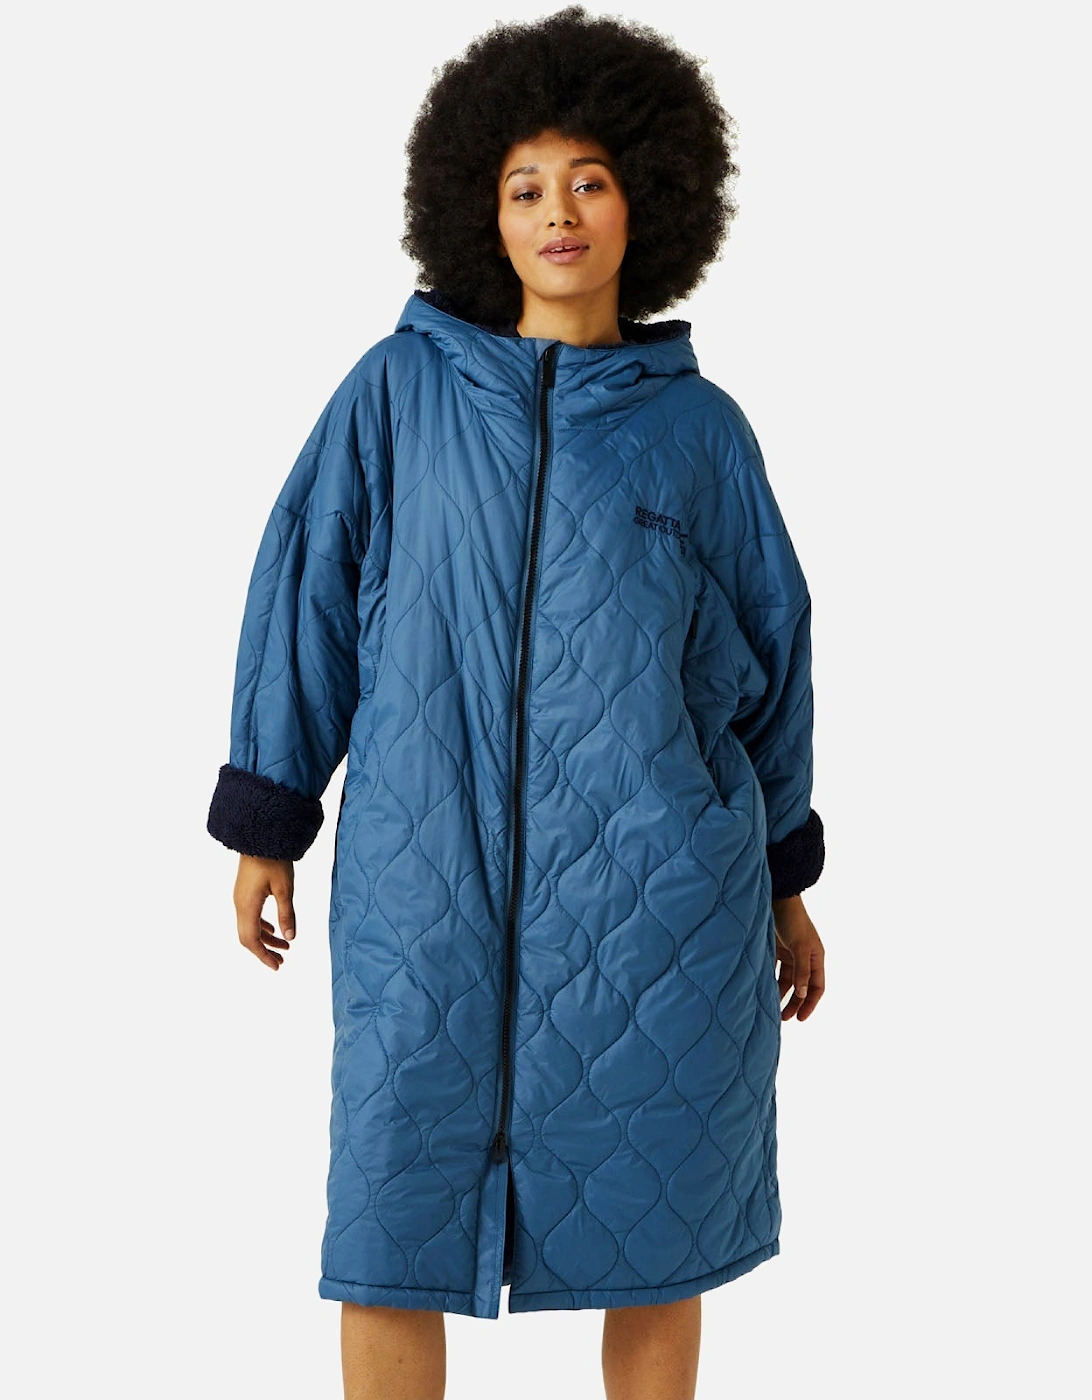 Adults Quilted Sprit Of Adventure Changing Robe